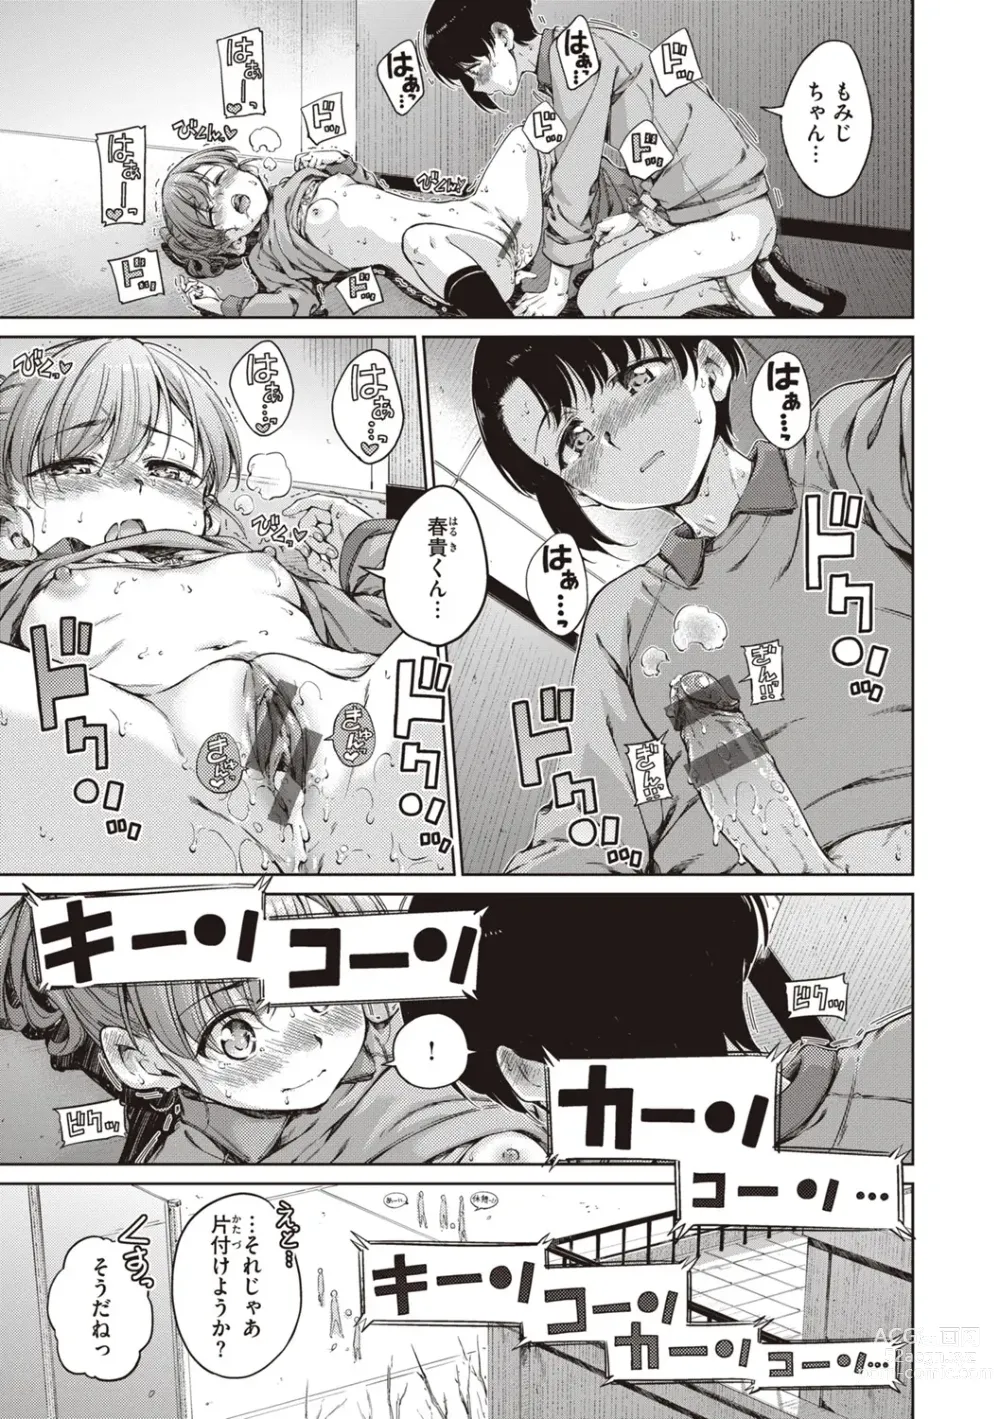 Page 187 of manga Wataame to Caramel - Cotton Candy and Caramel